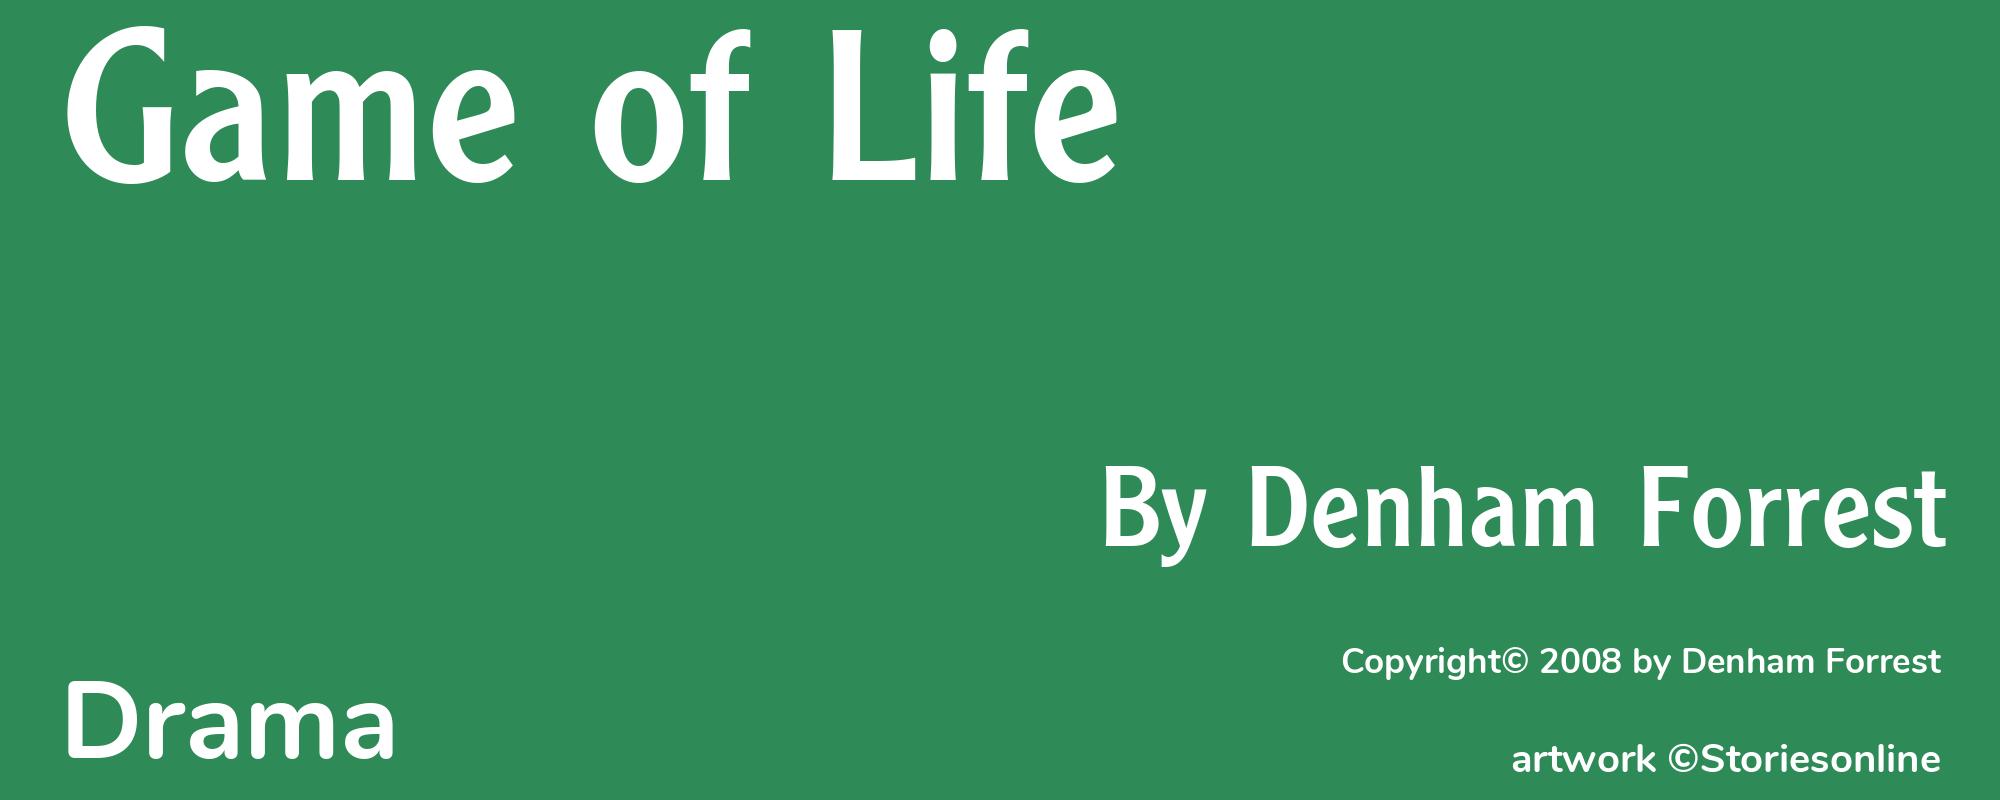 Game of Life - Cover